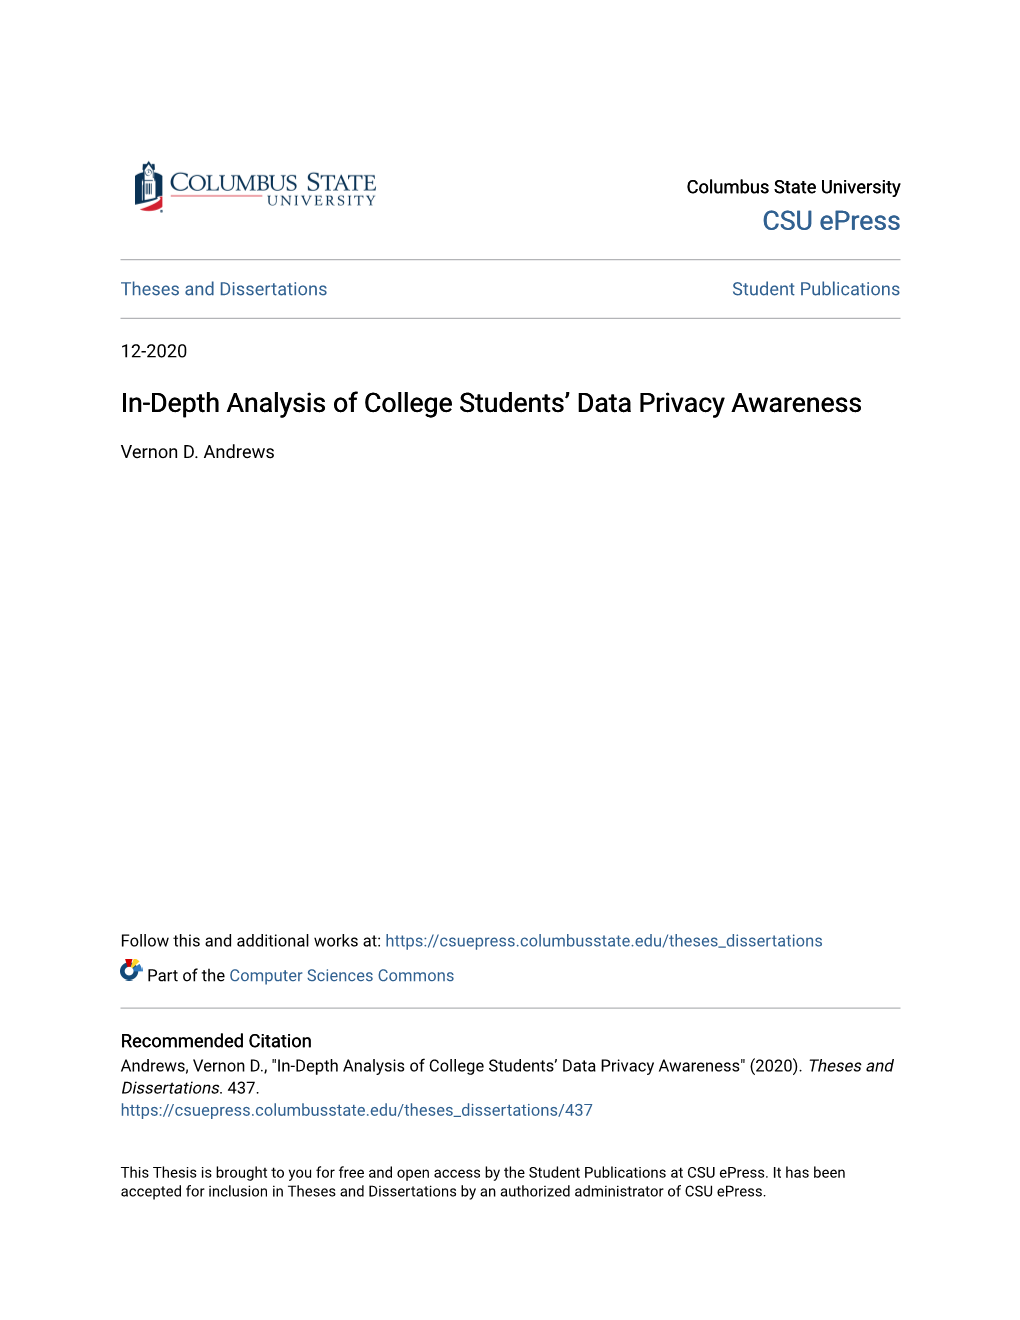 In-Depth Analysis of College Students' Data Privacy Awareness